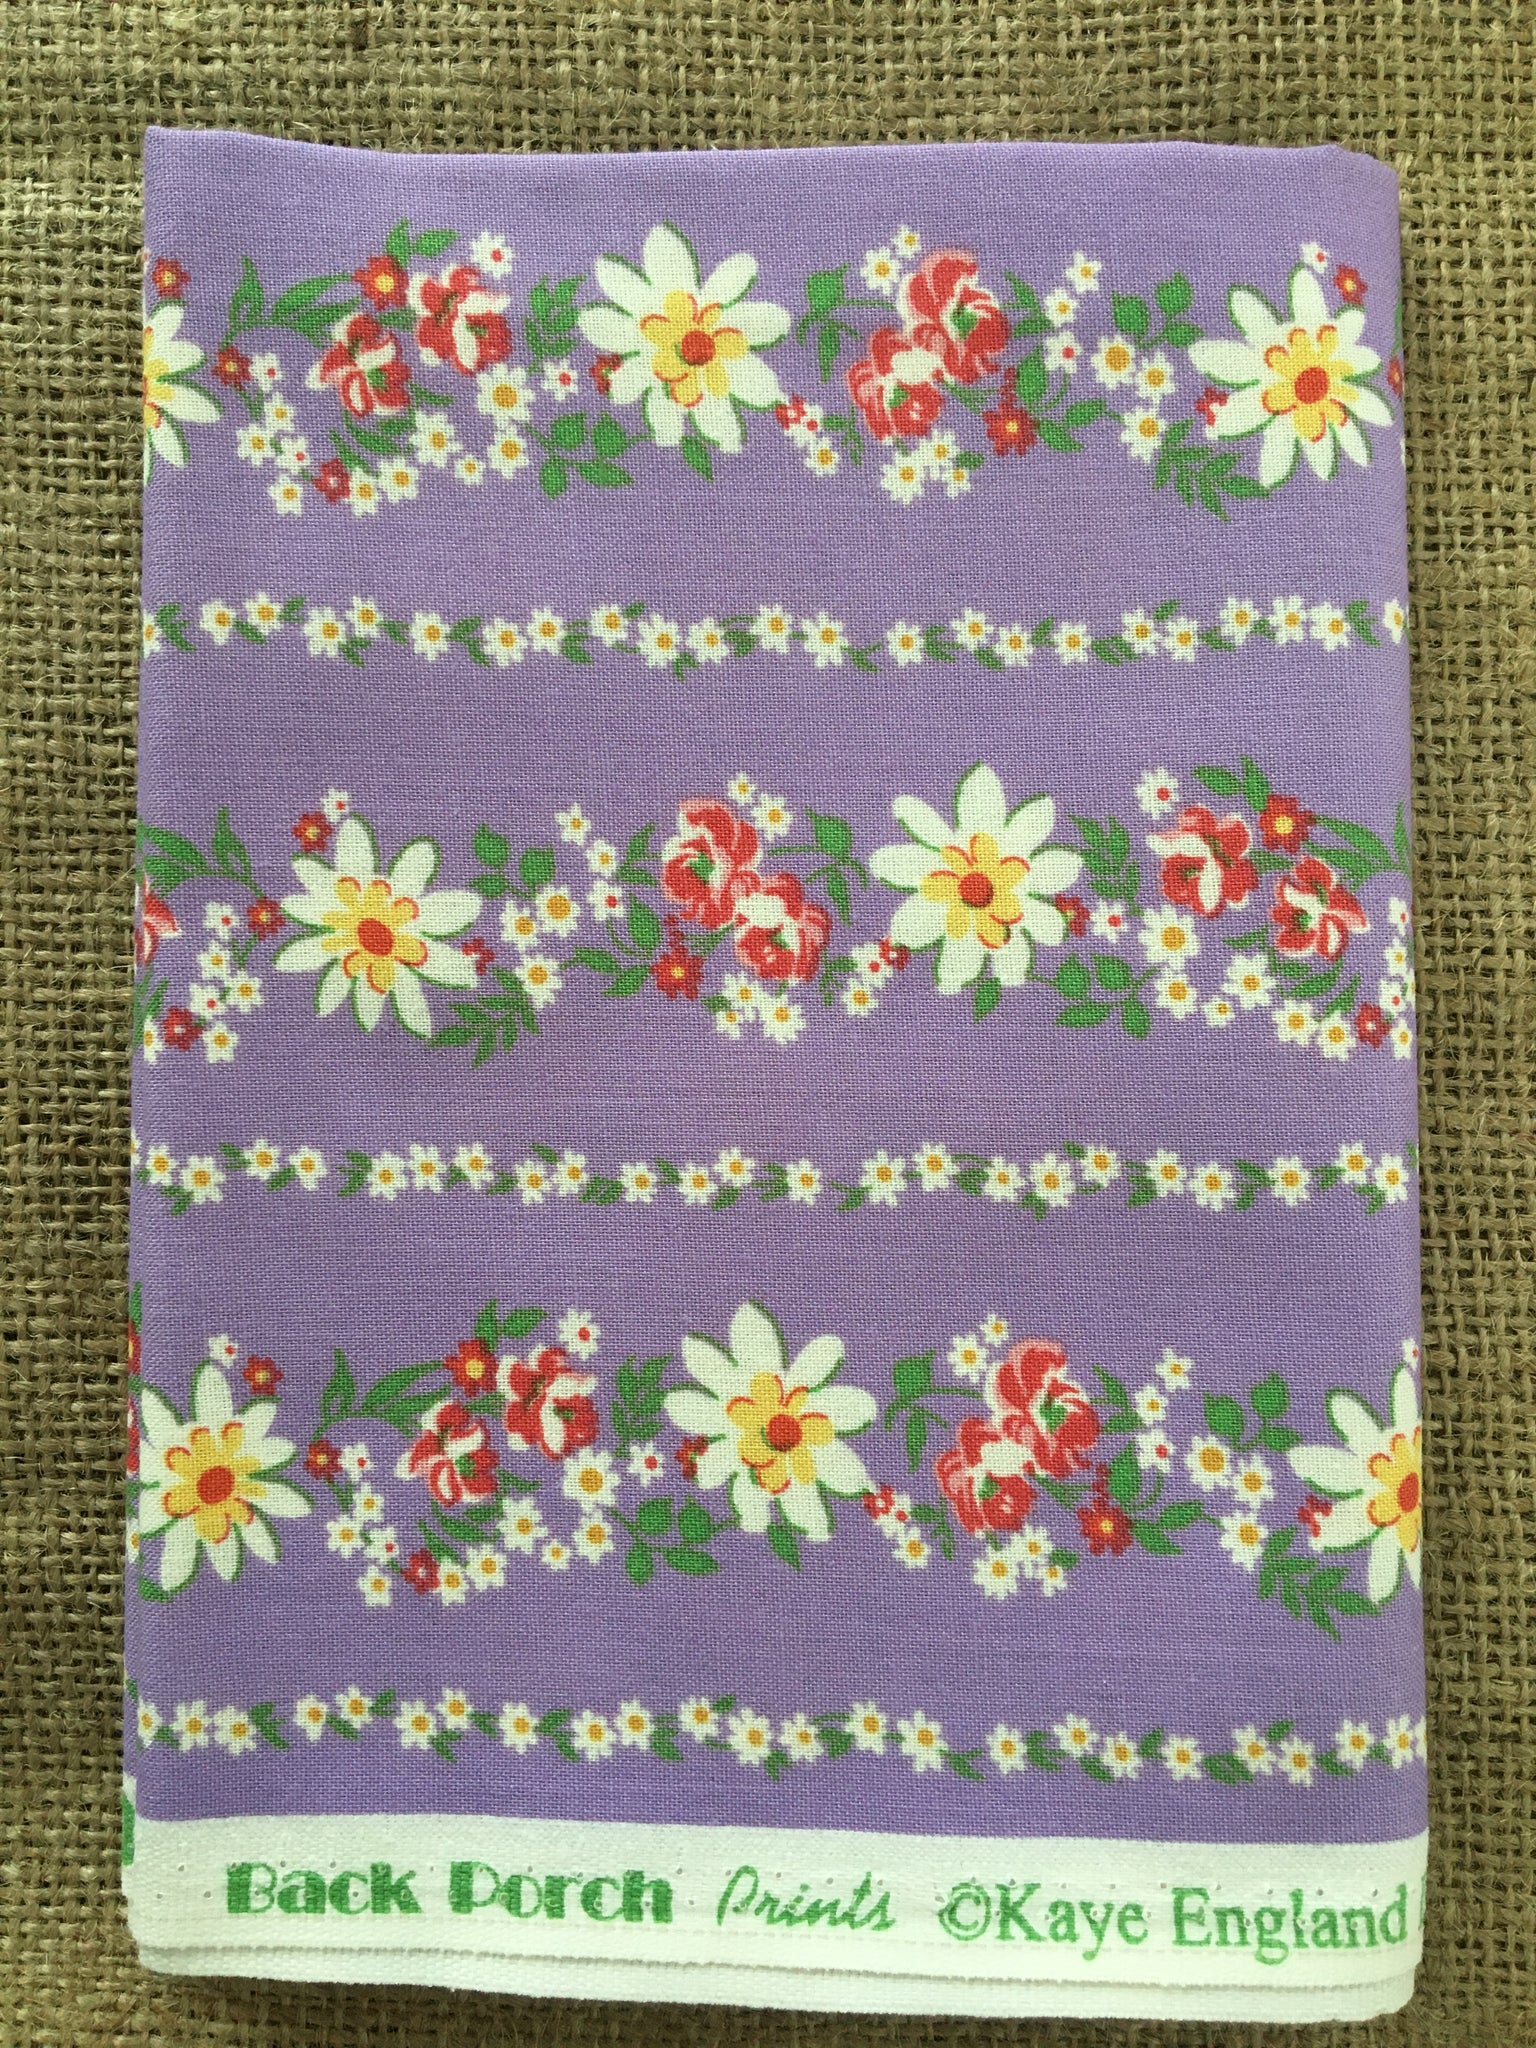 Back Porch Rows of Flowers 30's Reproduction by Kaye England for Wilmington Prints - $6.00 Half Yard Cut